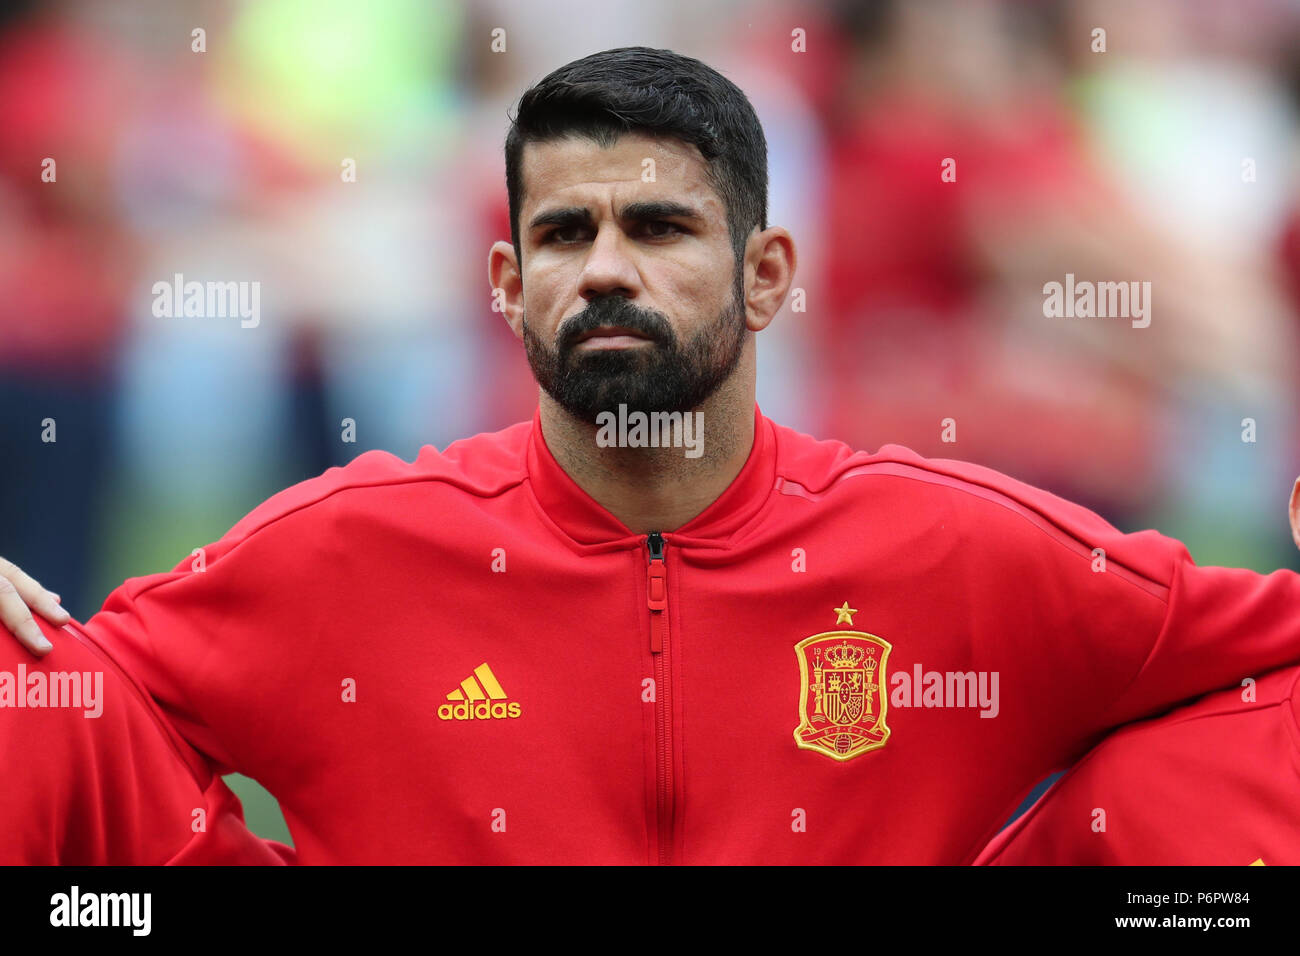 Moscow, Russia. 1st July, 2018. Diego Costa SPAIN SPAIN V RUSSIA, 2018 FIFA WORLD CUP RUSSIA 01 July 2018 GBC9120 Spain v Russia 2018 FIFA World Cup Russia STRICTLY EDITORIAL USE ONLY. If The Player/Players Depicted In This Image Is/Are Playing For An English Club Or The England National Team. Then This Image May Only Be Used For Editorial Purposes. No Commercial Use. The Following Usages Are Also Restricted EVEN IF IN AN EDITORIAL CONTEXT: Use in conjuction with, or part of, any unauthorized audio, video, data, fixture lists, club/league logos, Betting, Games or any 'live' services. Also Rest Stock Photo